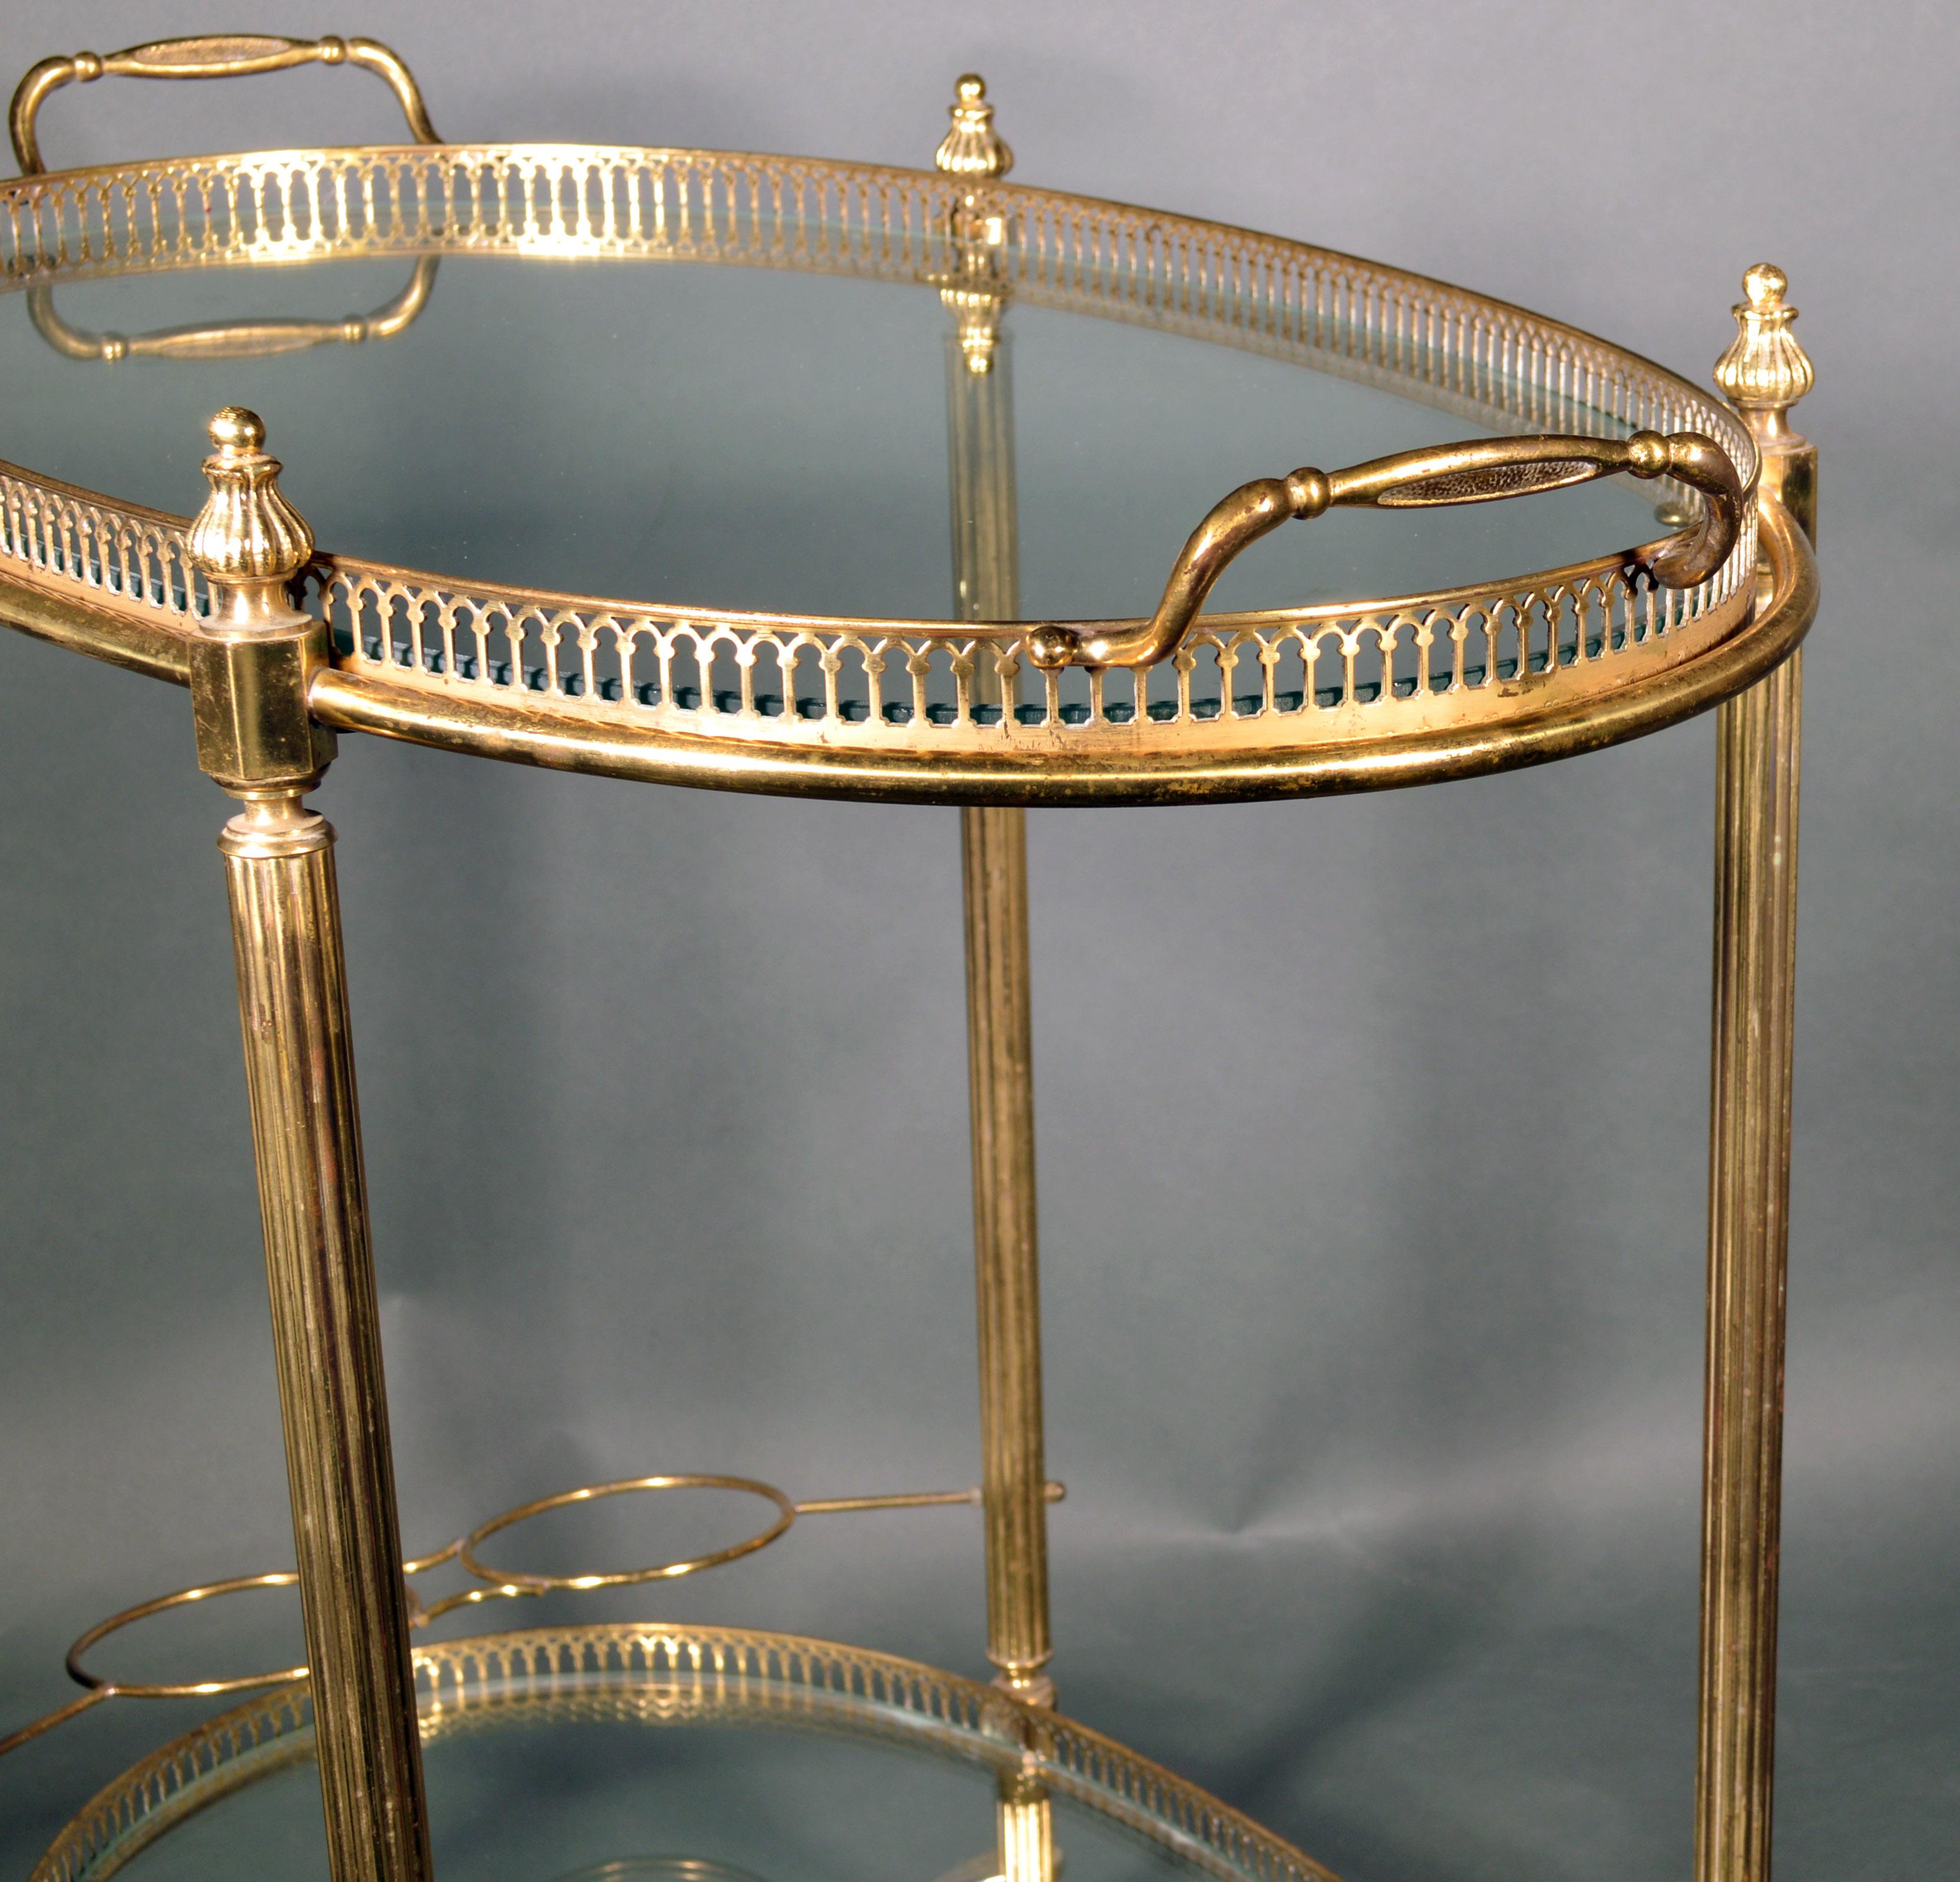 Mid-Century Modern French brass and glass bar cart
The 1950s.


The oval Mid-Century Modern gold brass metal bar cart has two glass shelves with a pierced brass gallery. The top shelf is actually a tray which is a removable serving tray with